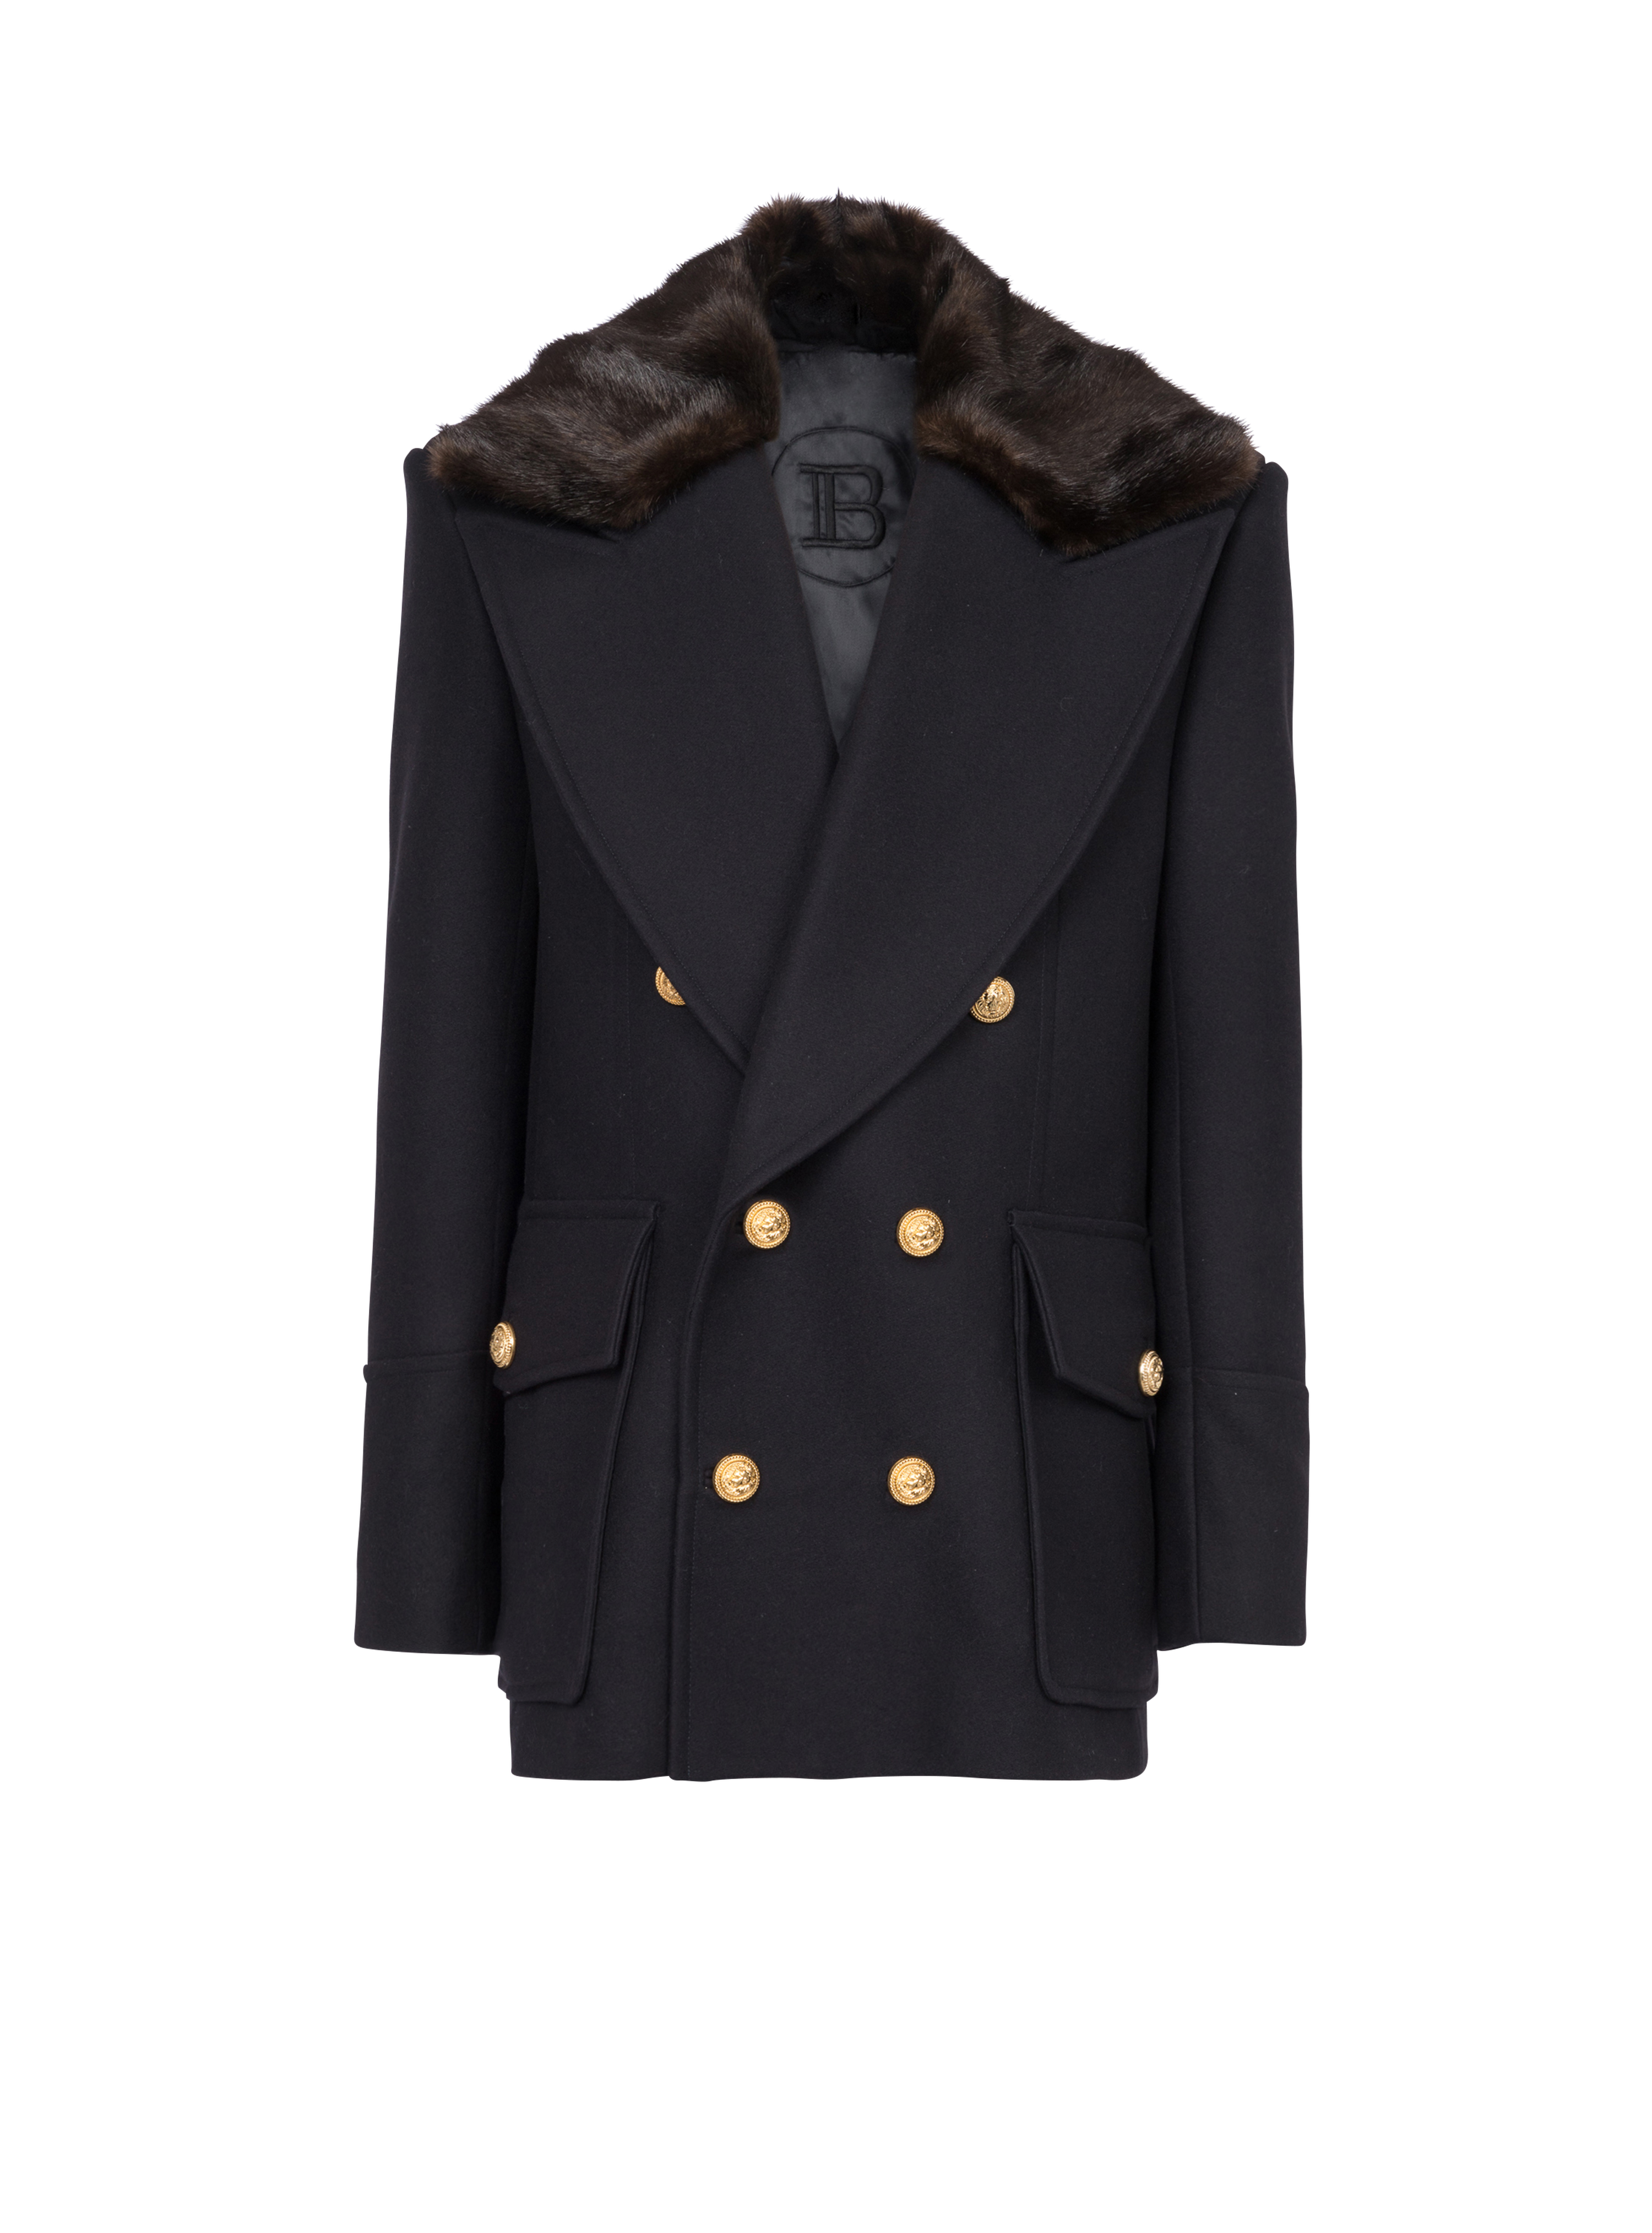 Unisex - Six-button wool coat with detachable collar, navy